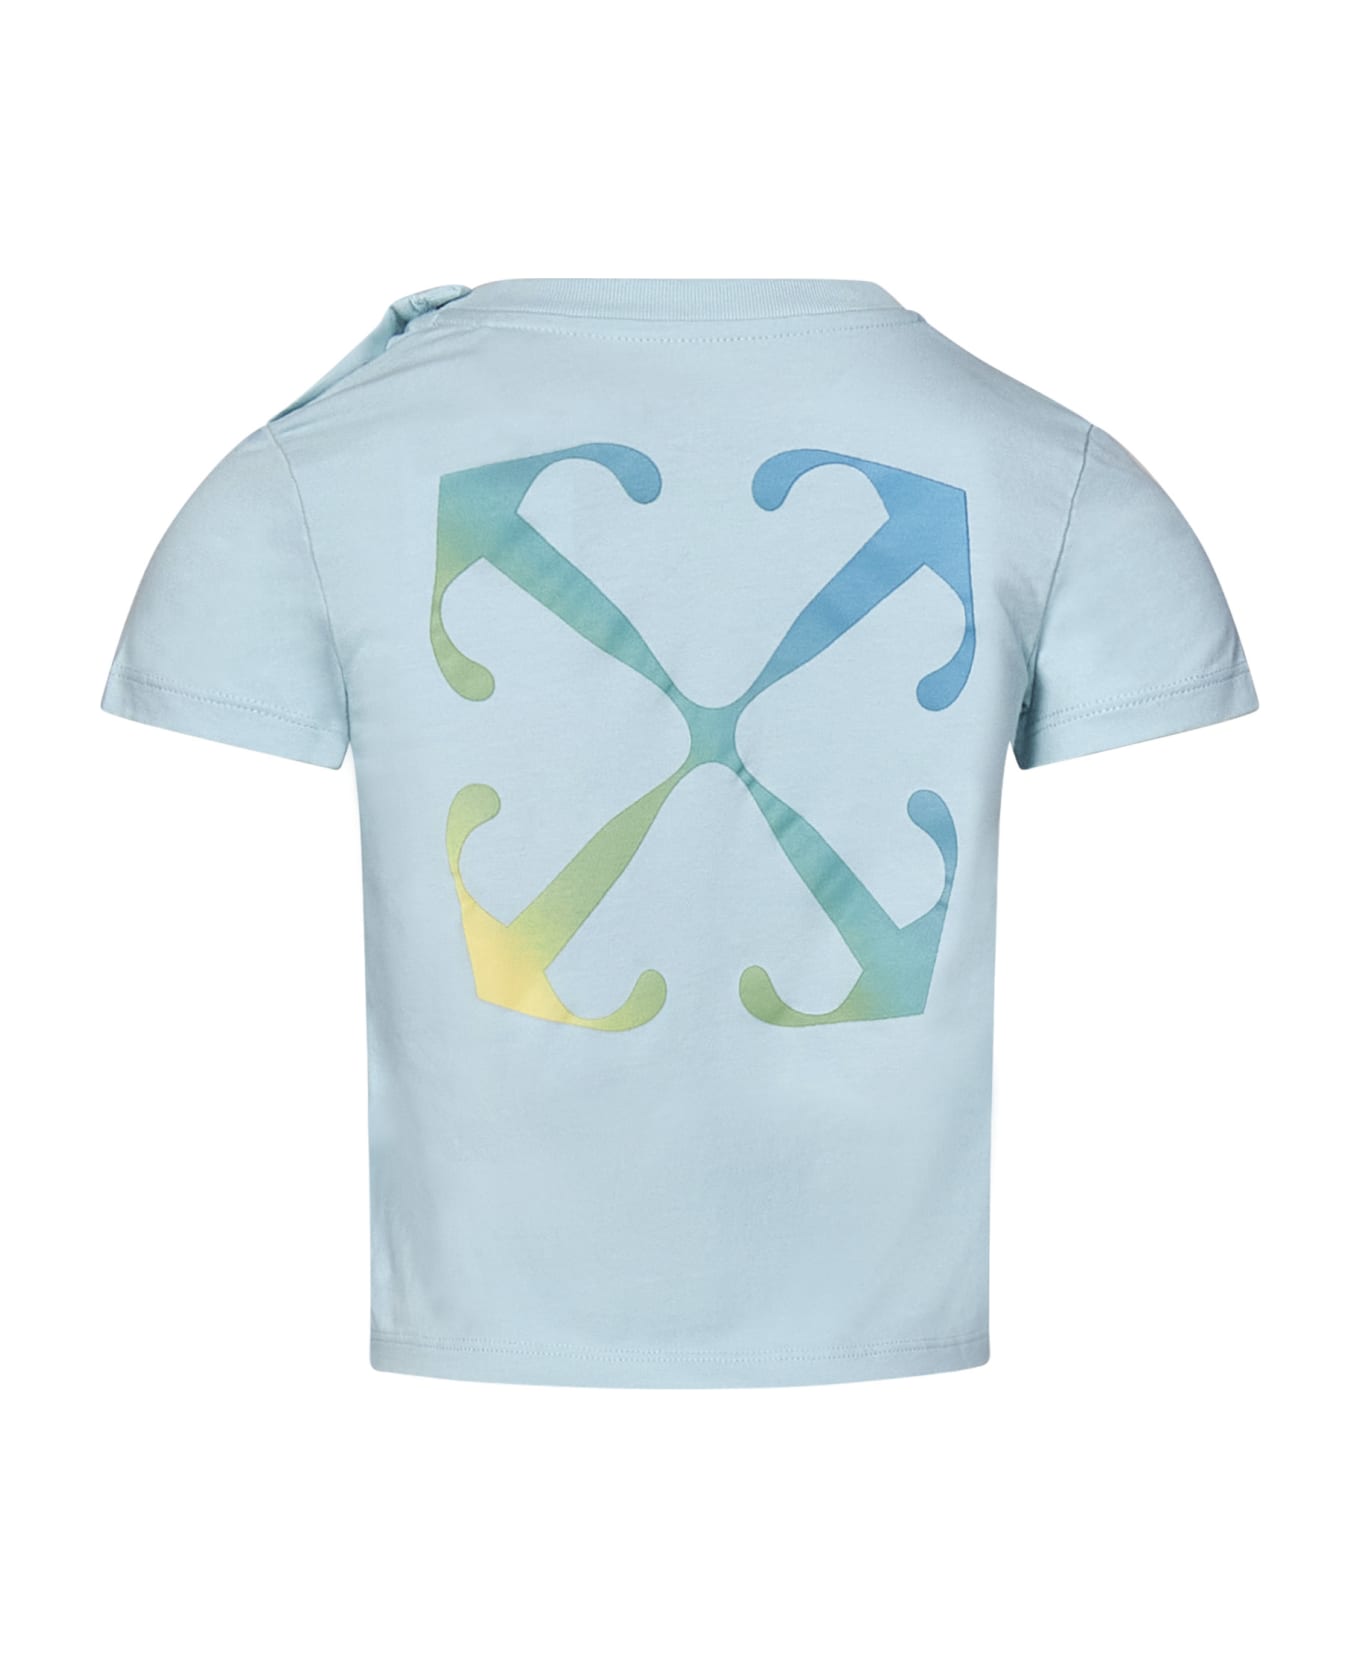 Off-White Kids T-shirt - Clear Blue